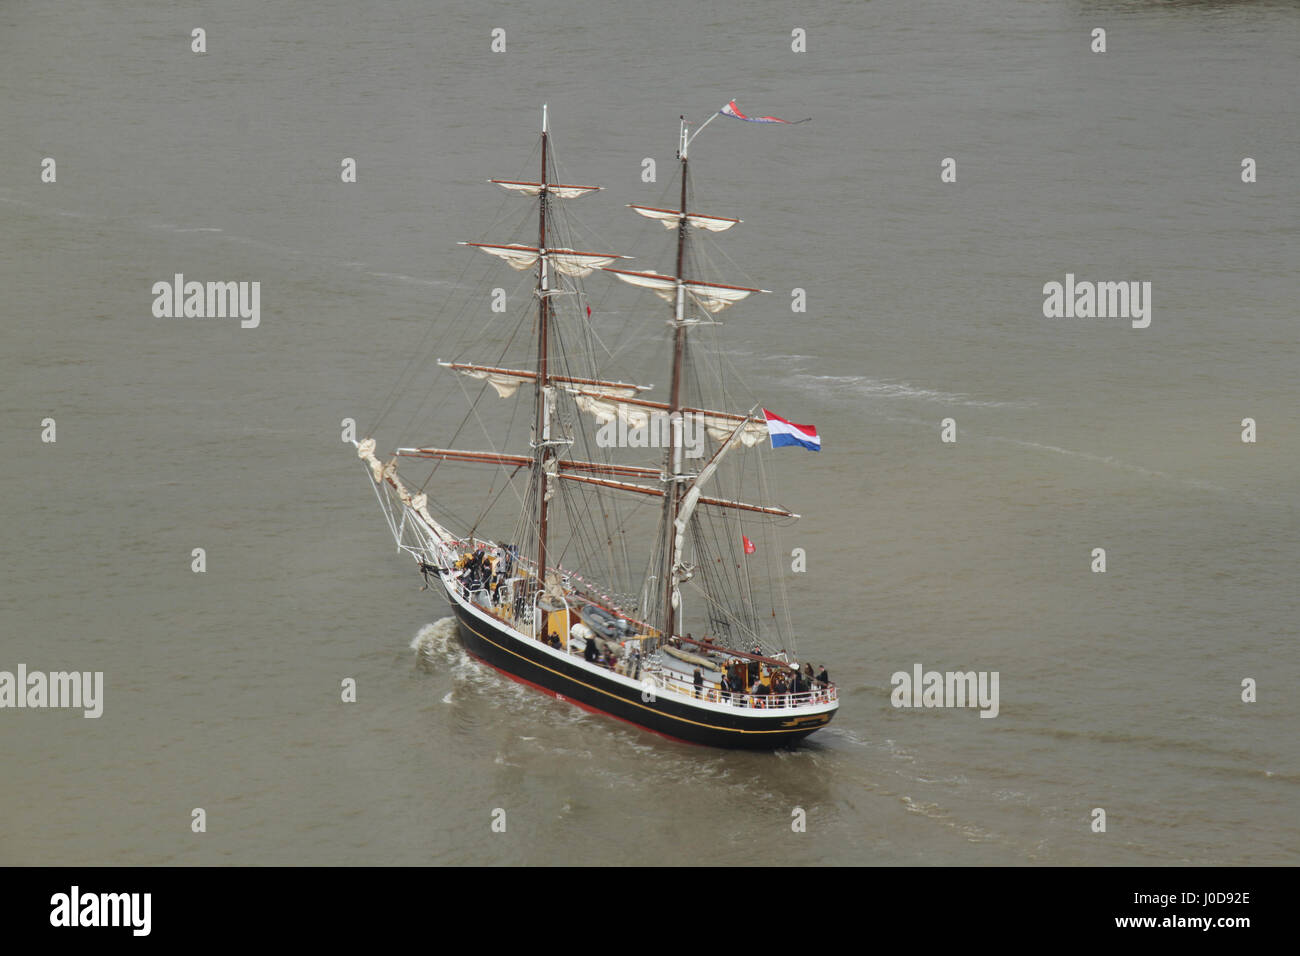 London, United Kingdom - April 12: The Morgenster sails around the O2 Arena on the river Thames ahead of the Tall Ships Regatta 2017, where around 40 Tall Ships are scheduled to sail the river Thames to Greenwich, marking the 150th anniversary of the Canadian Confederation. Over the Easter weekend, on 13 to 16 April 2017, the ships will be anchored at the Maritime Greenwich UNESCO World Heritage Site in Greenwich town centre, and at the Royal Arsenal Riverside in Woolwich before they sail to Quebec, Canada, via Portugal, Bermuda and Boston. © David Mbiyu/Alamy Live News Stock Photo